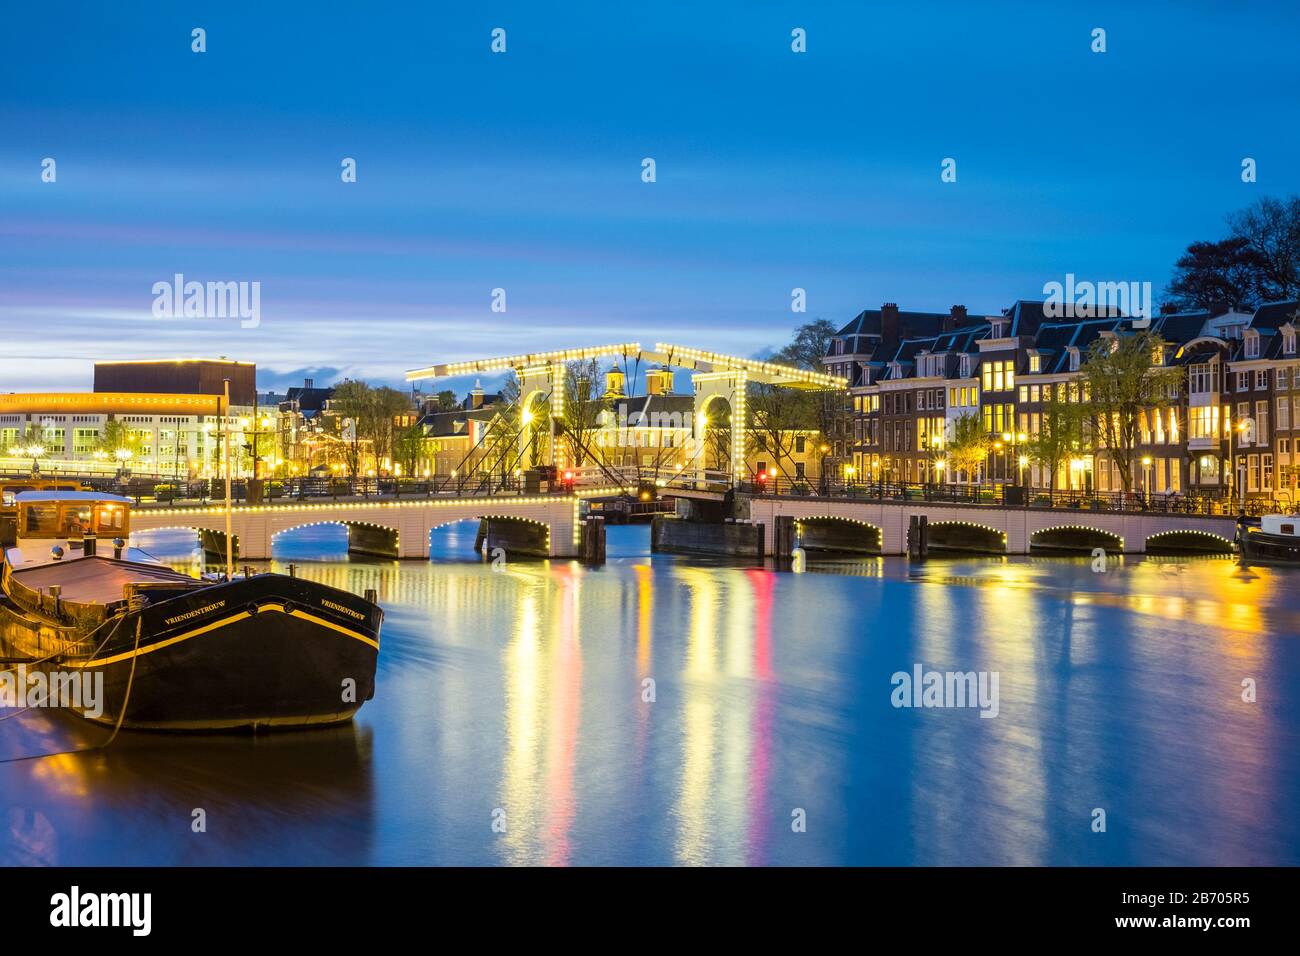 Netherlands, North Holland, Amsterdam. Magere Brug, Skinny Bridge, on the Amstel River at night. Stock Photo